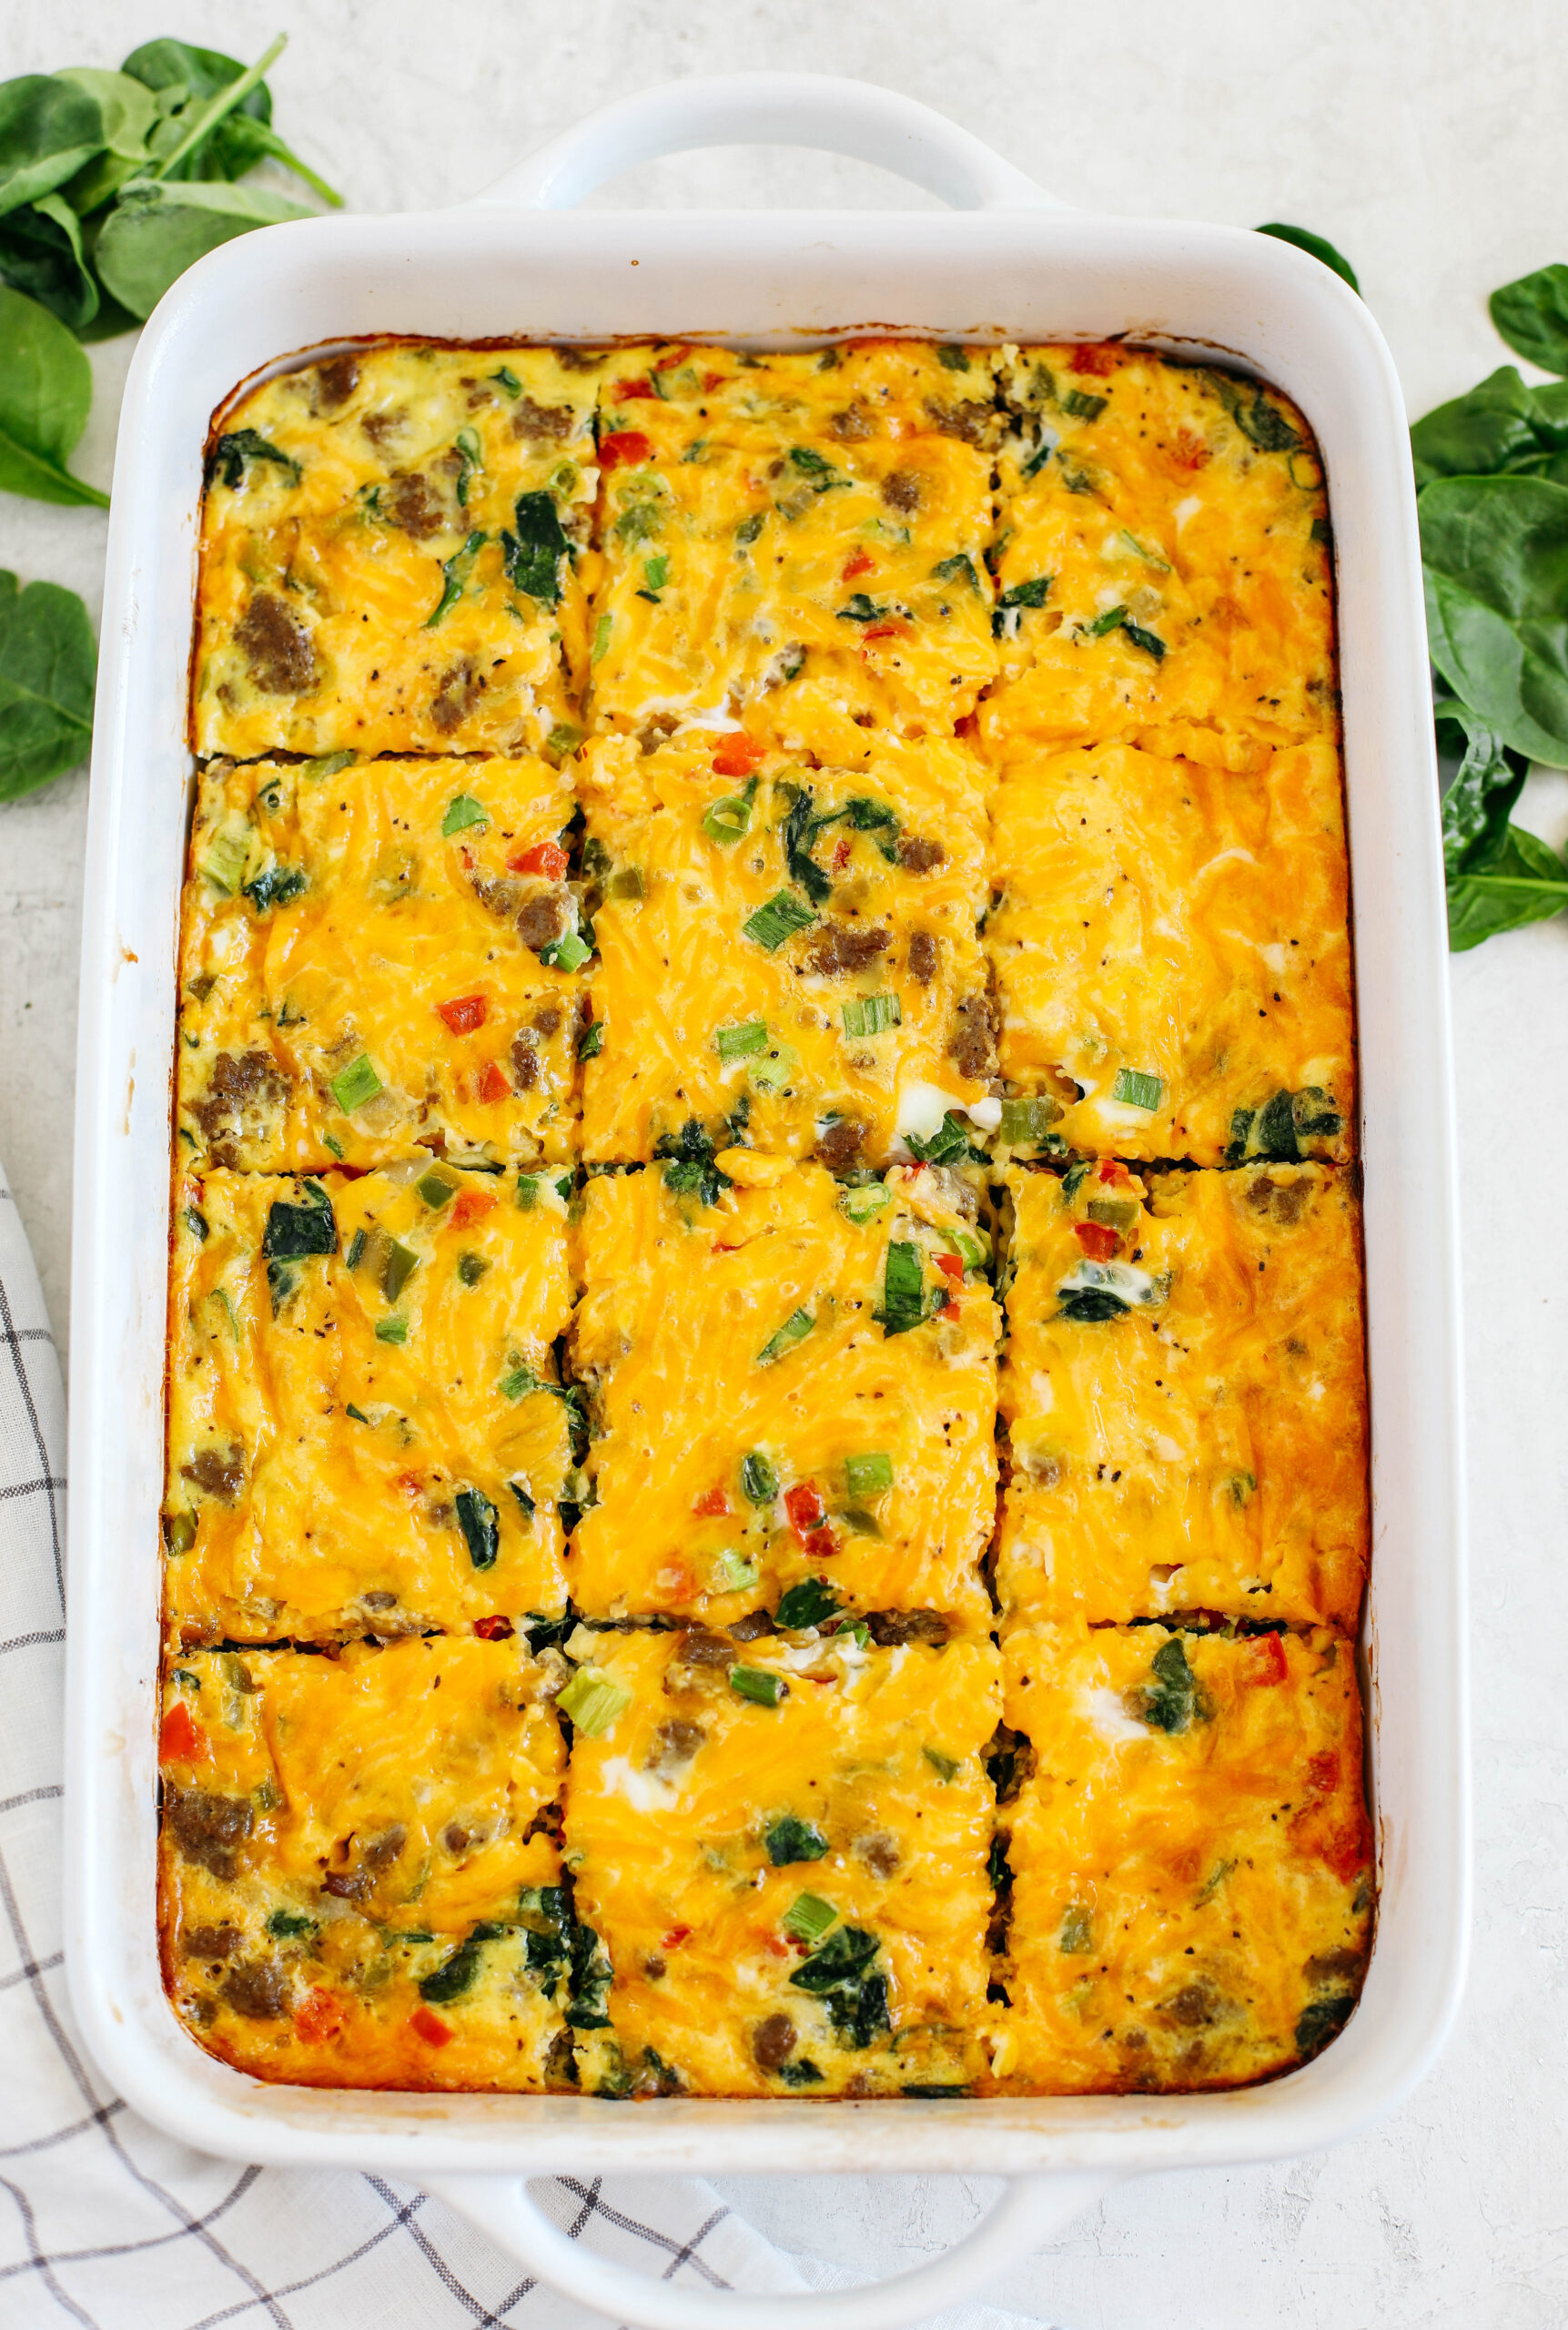 This Sausage and Veggie Egg Casserole makes the perfect low carb savory breakfast loaded with your favorite veggies, leafy greens, and delicious turkey sausage that is sure to be a crowdpleaser!